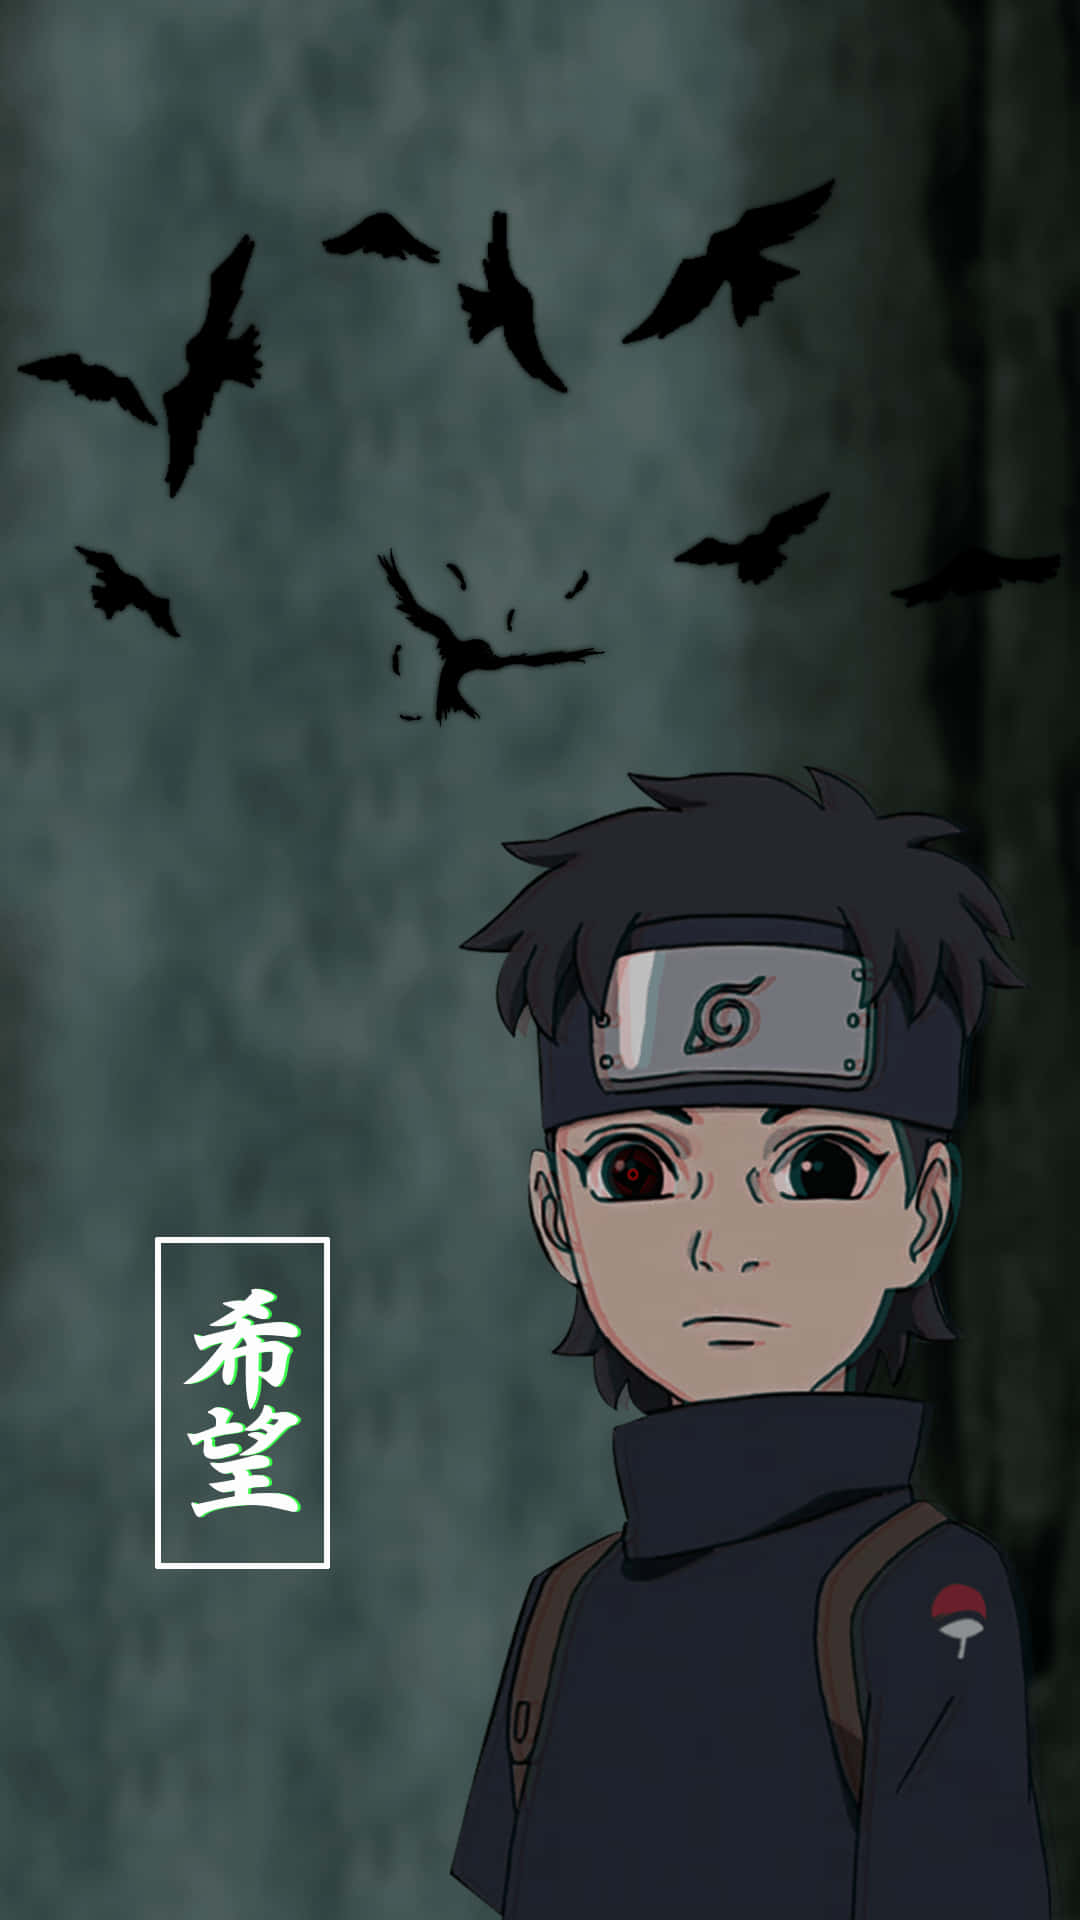 Young Itachi Aesthetic With Black Crows Flying Over Head In Gray Background Background